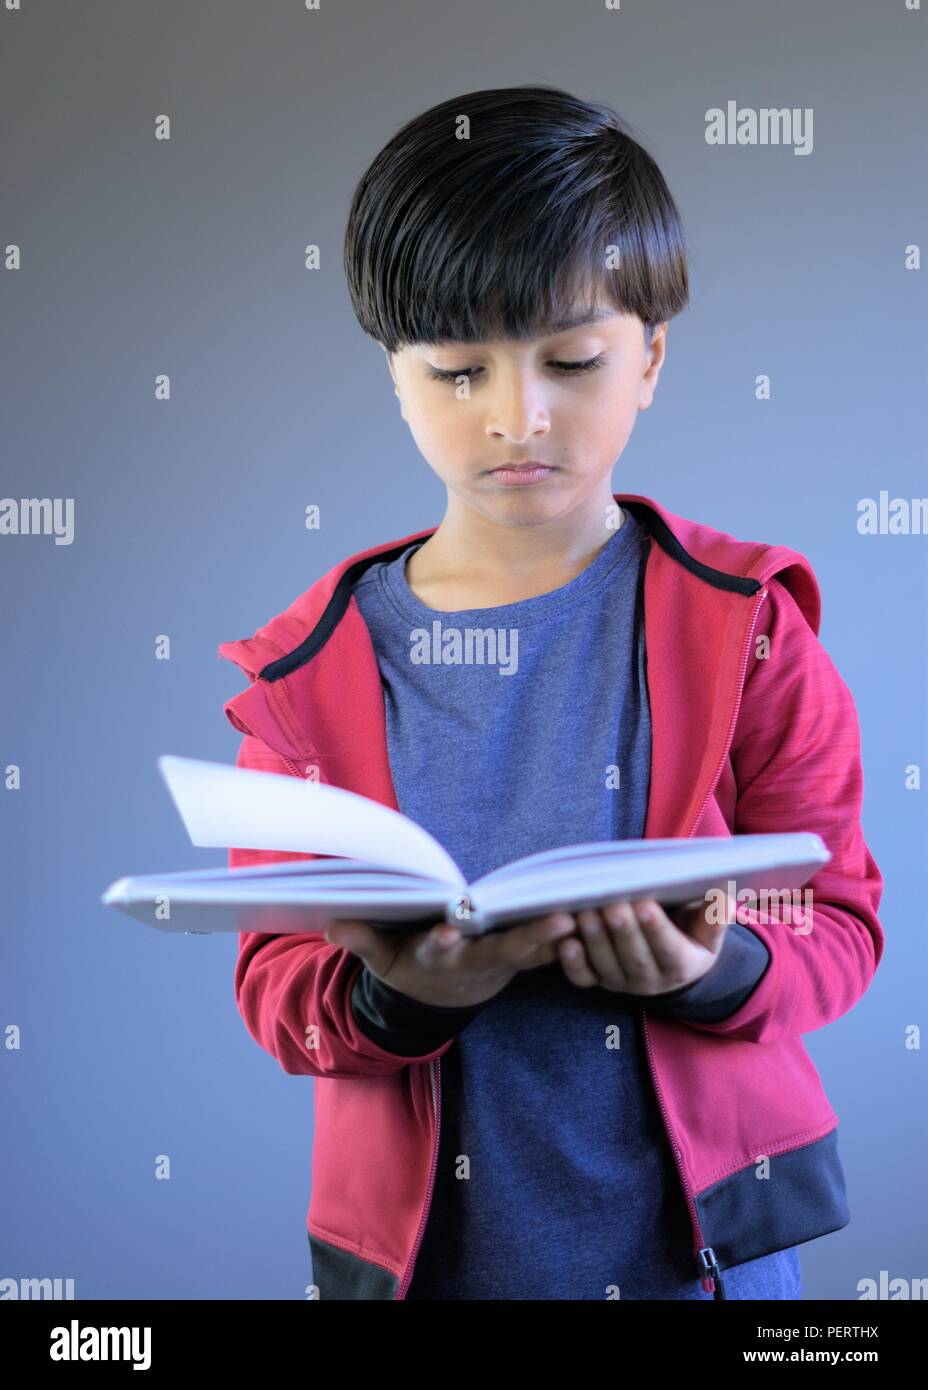 Portrait of young child reading book. Kid studying book. Stock Photo